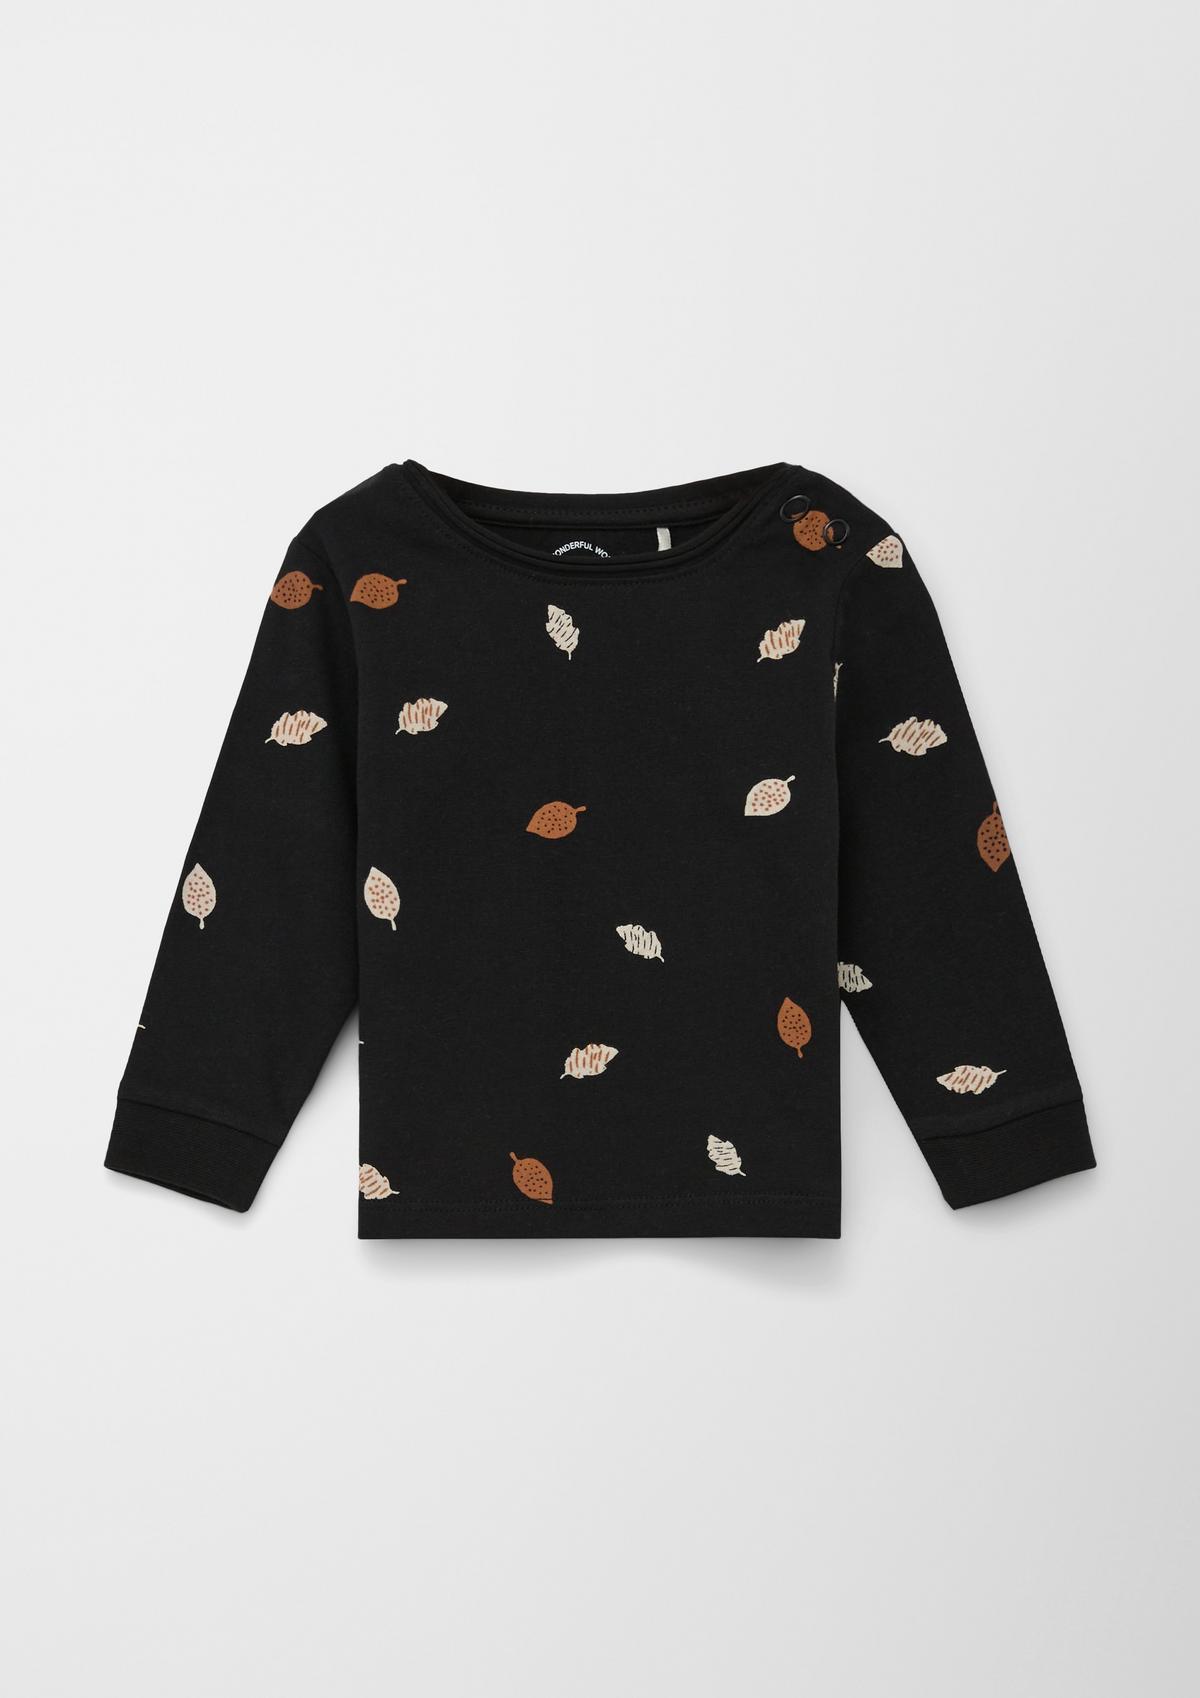 s.Oliver Long sleeve top with a cute leaf all-over print